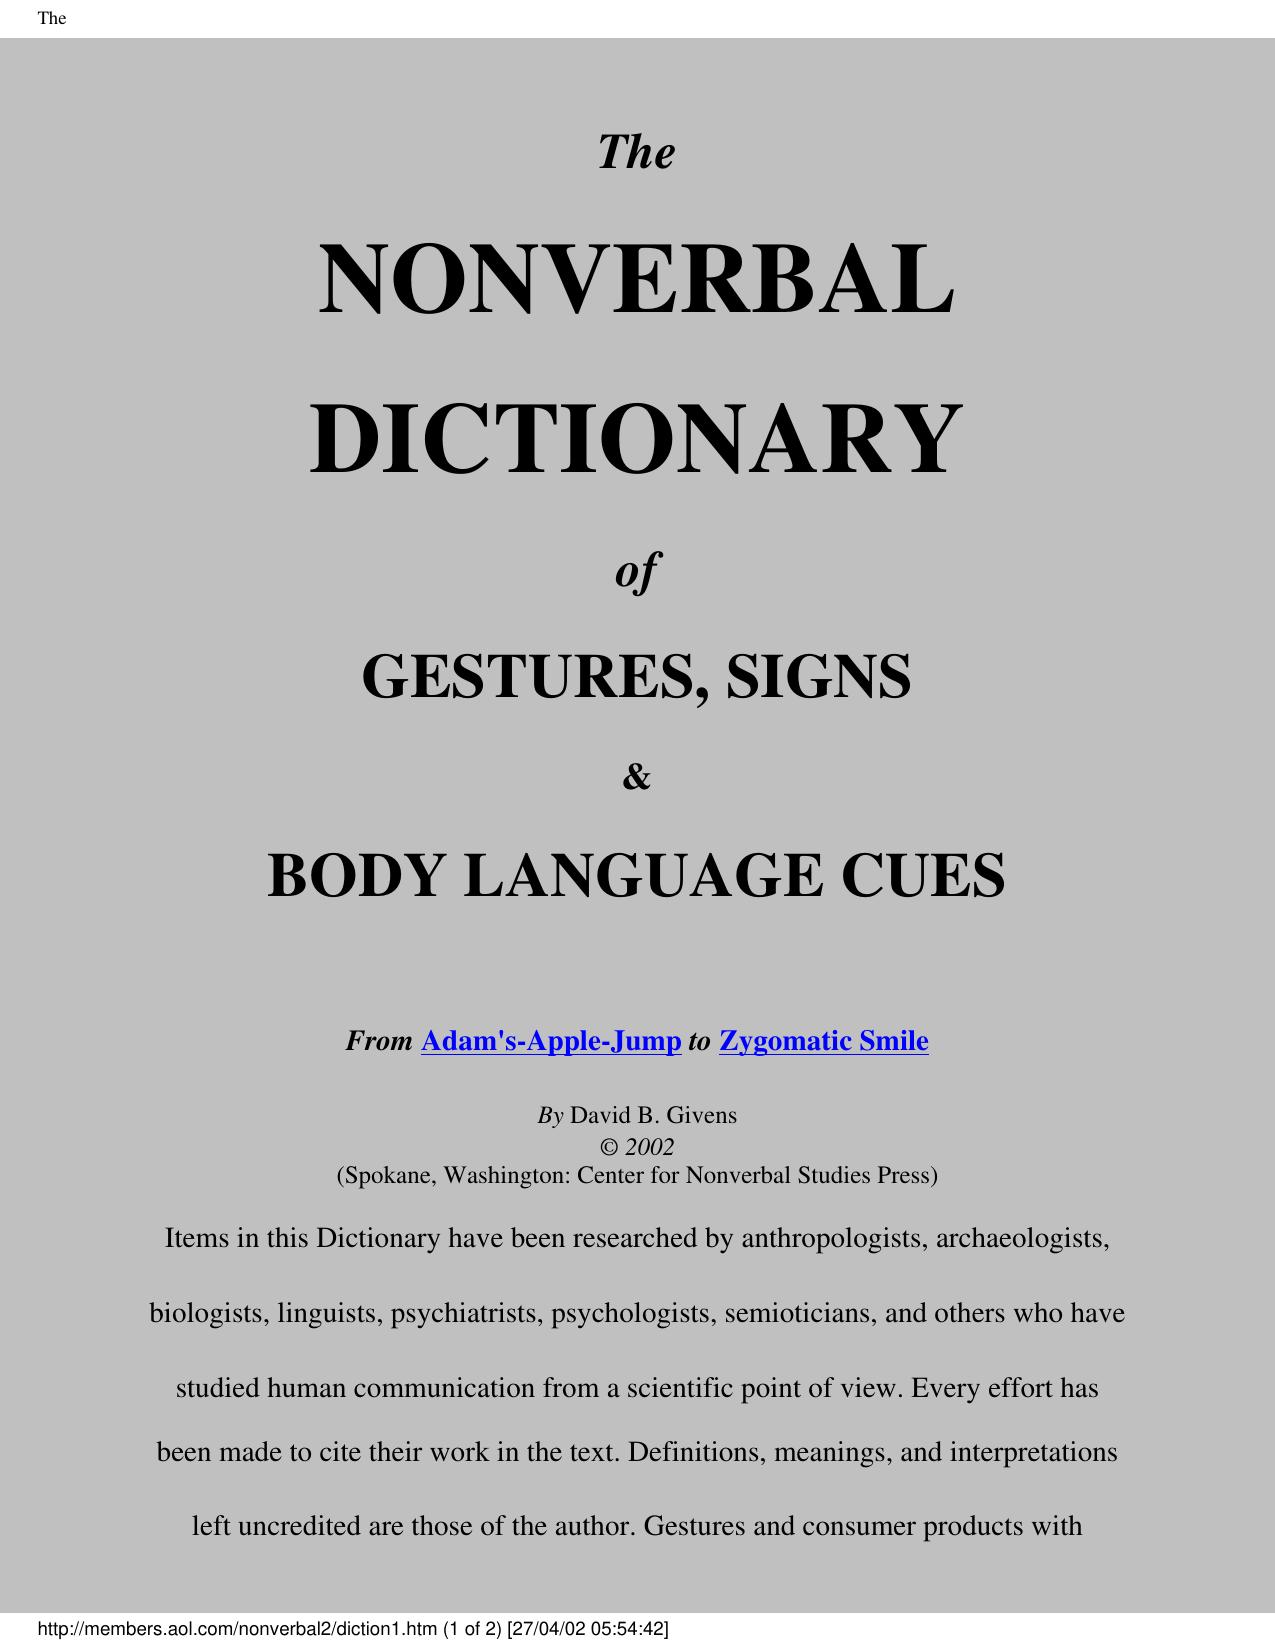 The Nonverbal Dictionary of Gestures, Signs & Body Language Cues: From Adam's-Apple-Jump to Zygomatic Smile